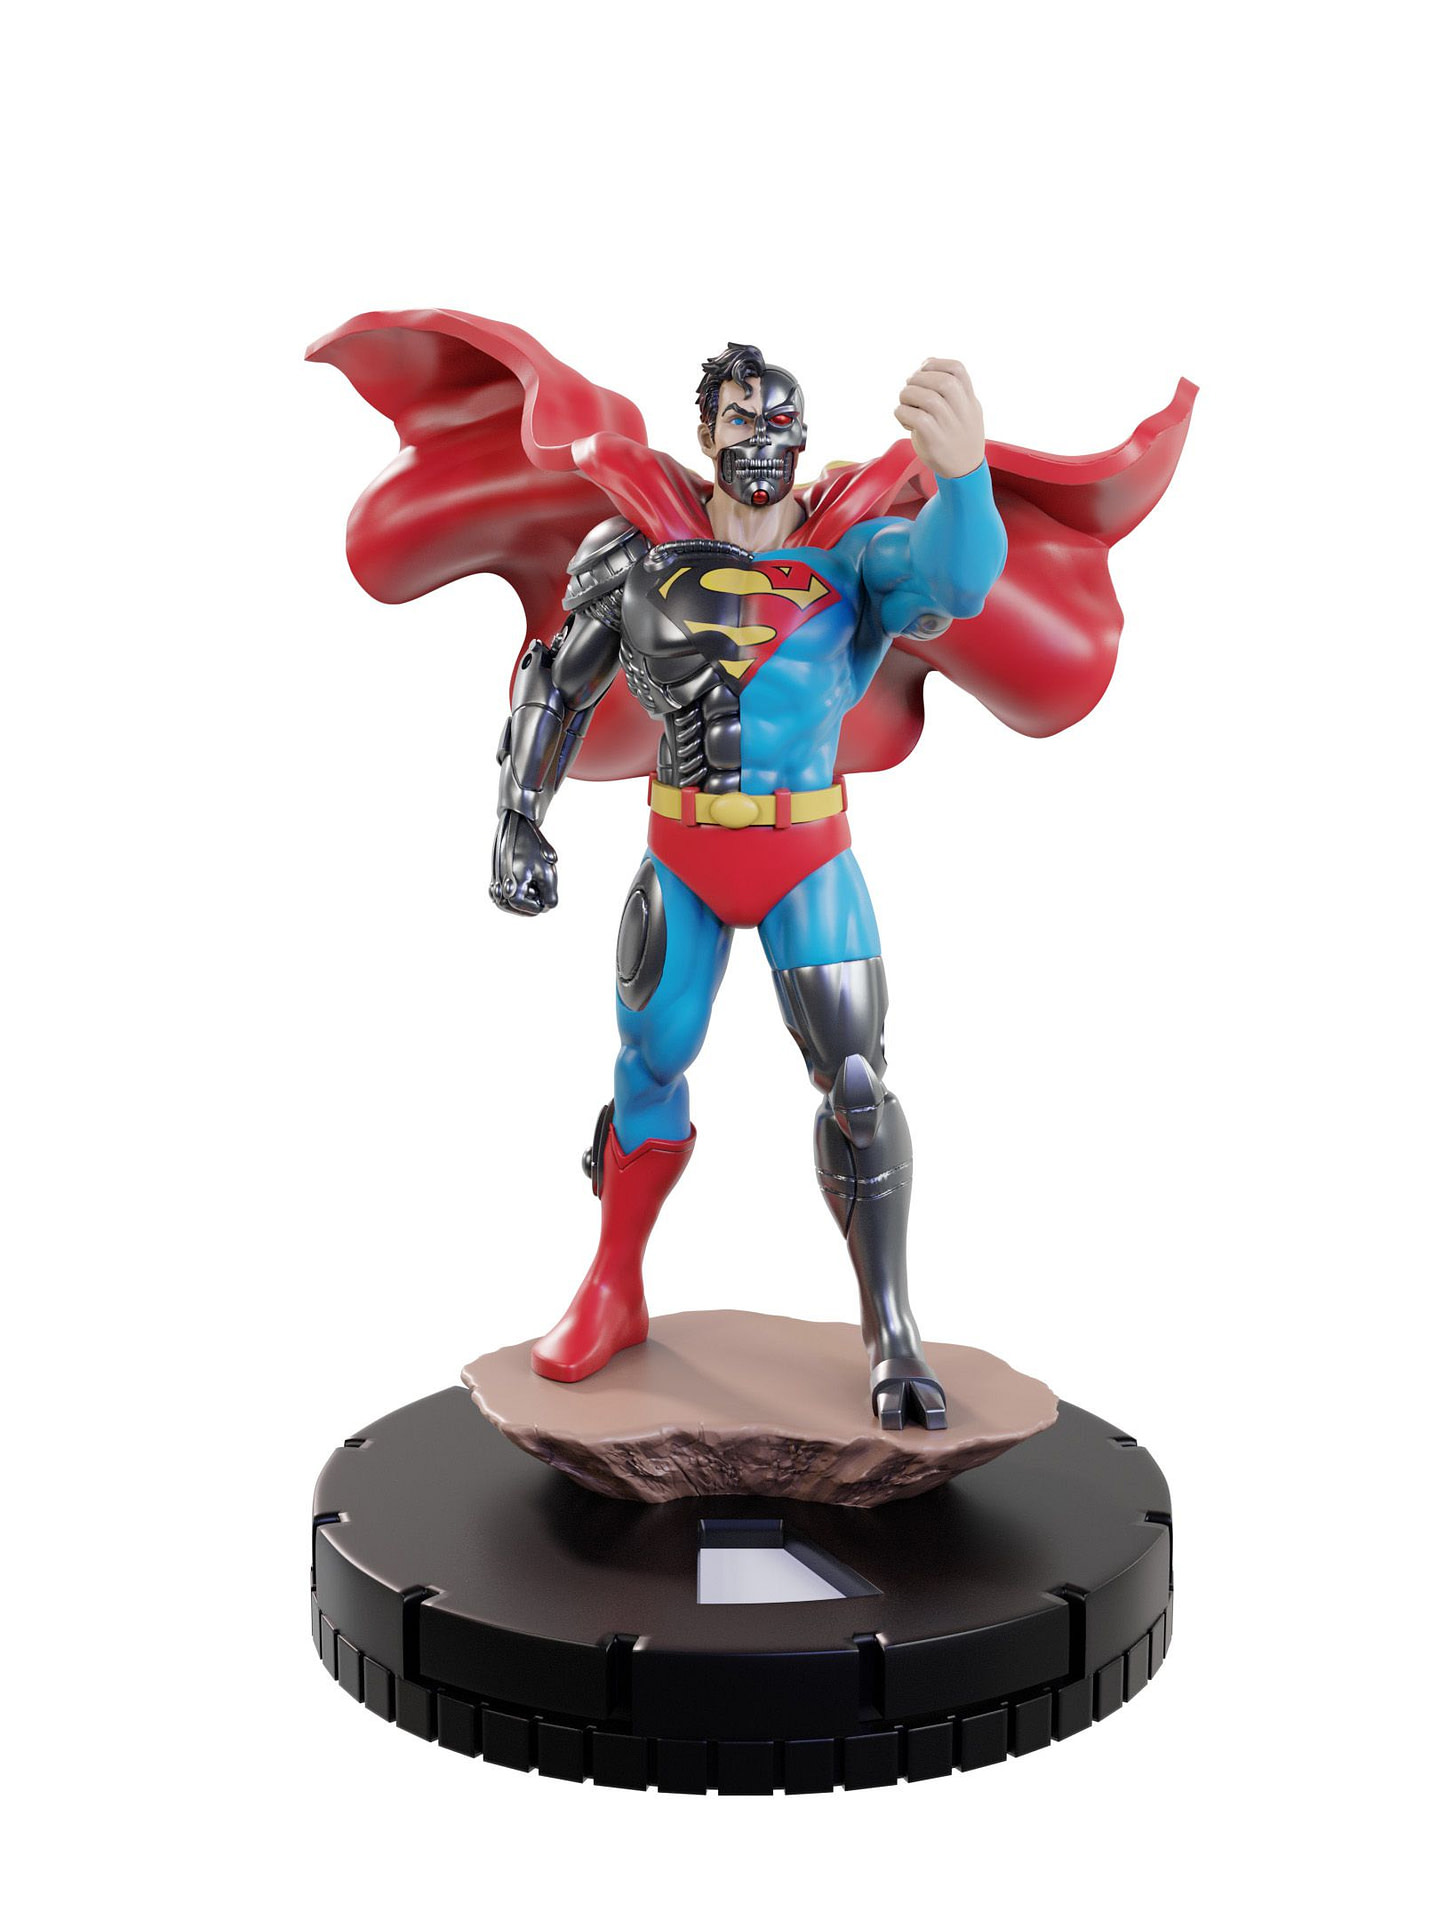 Cyborg Superman raises his fist in defiance. He’s a plastic miniature sitting on a clicking base.